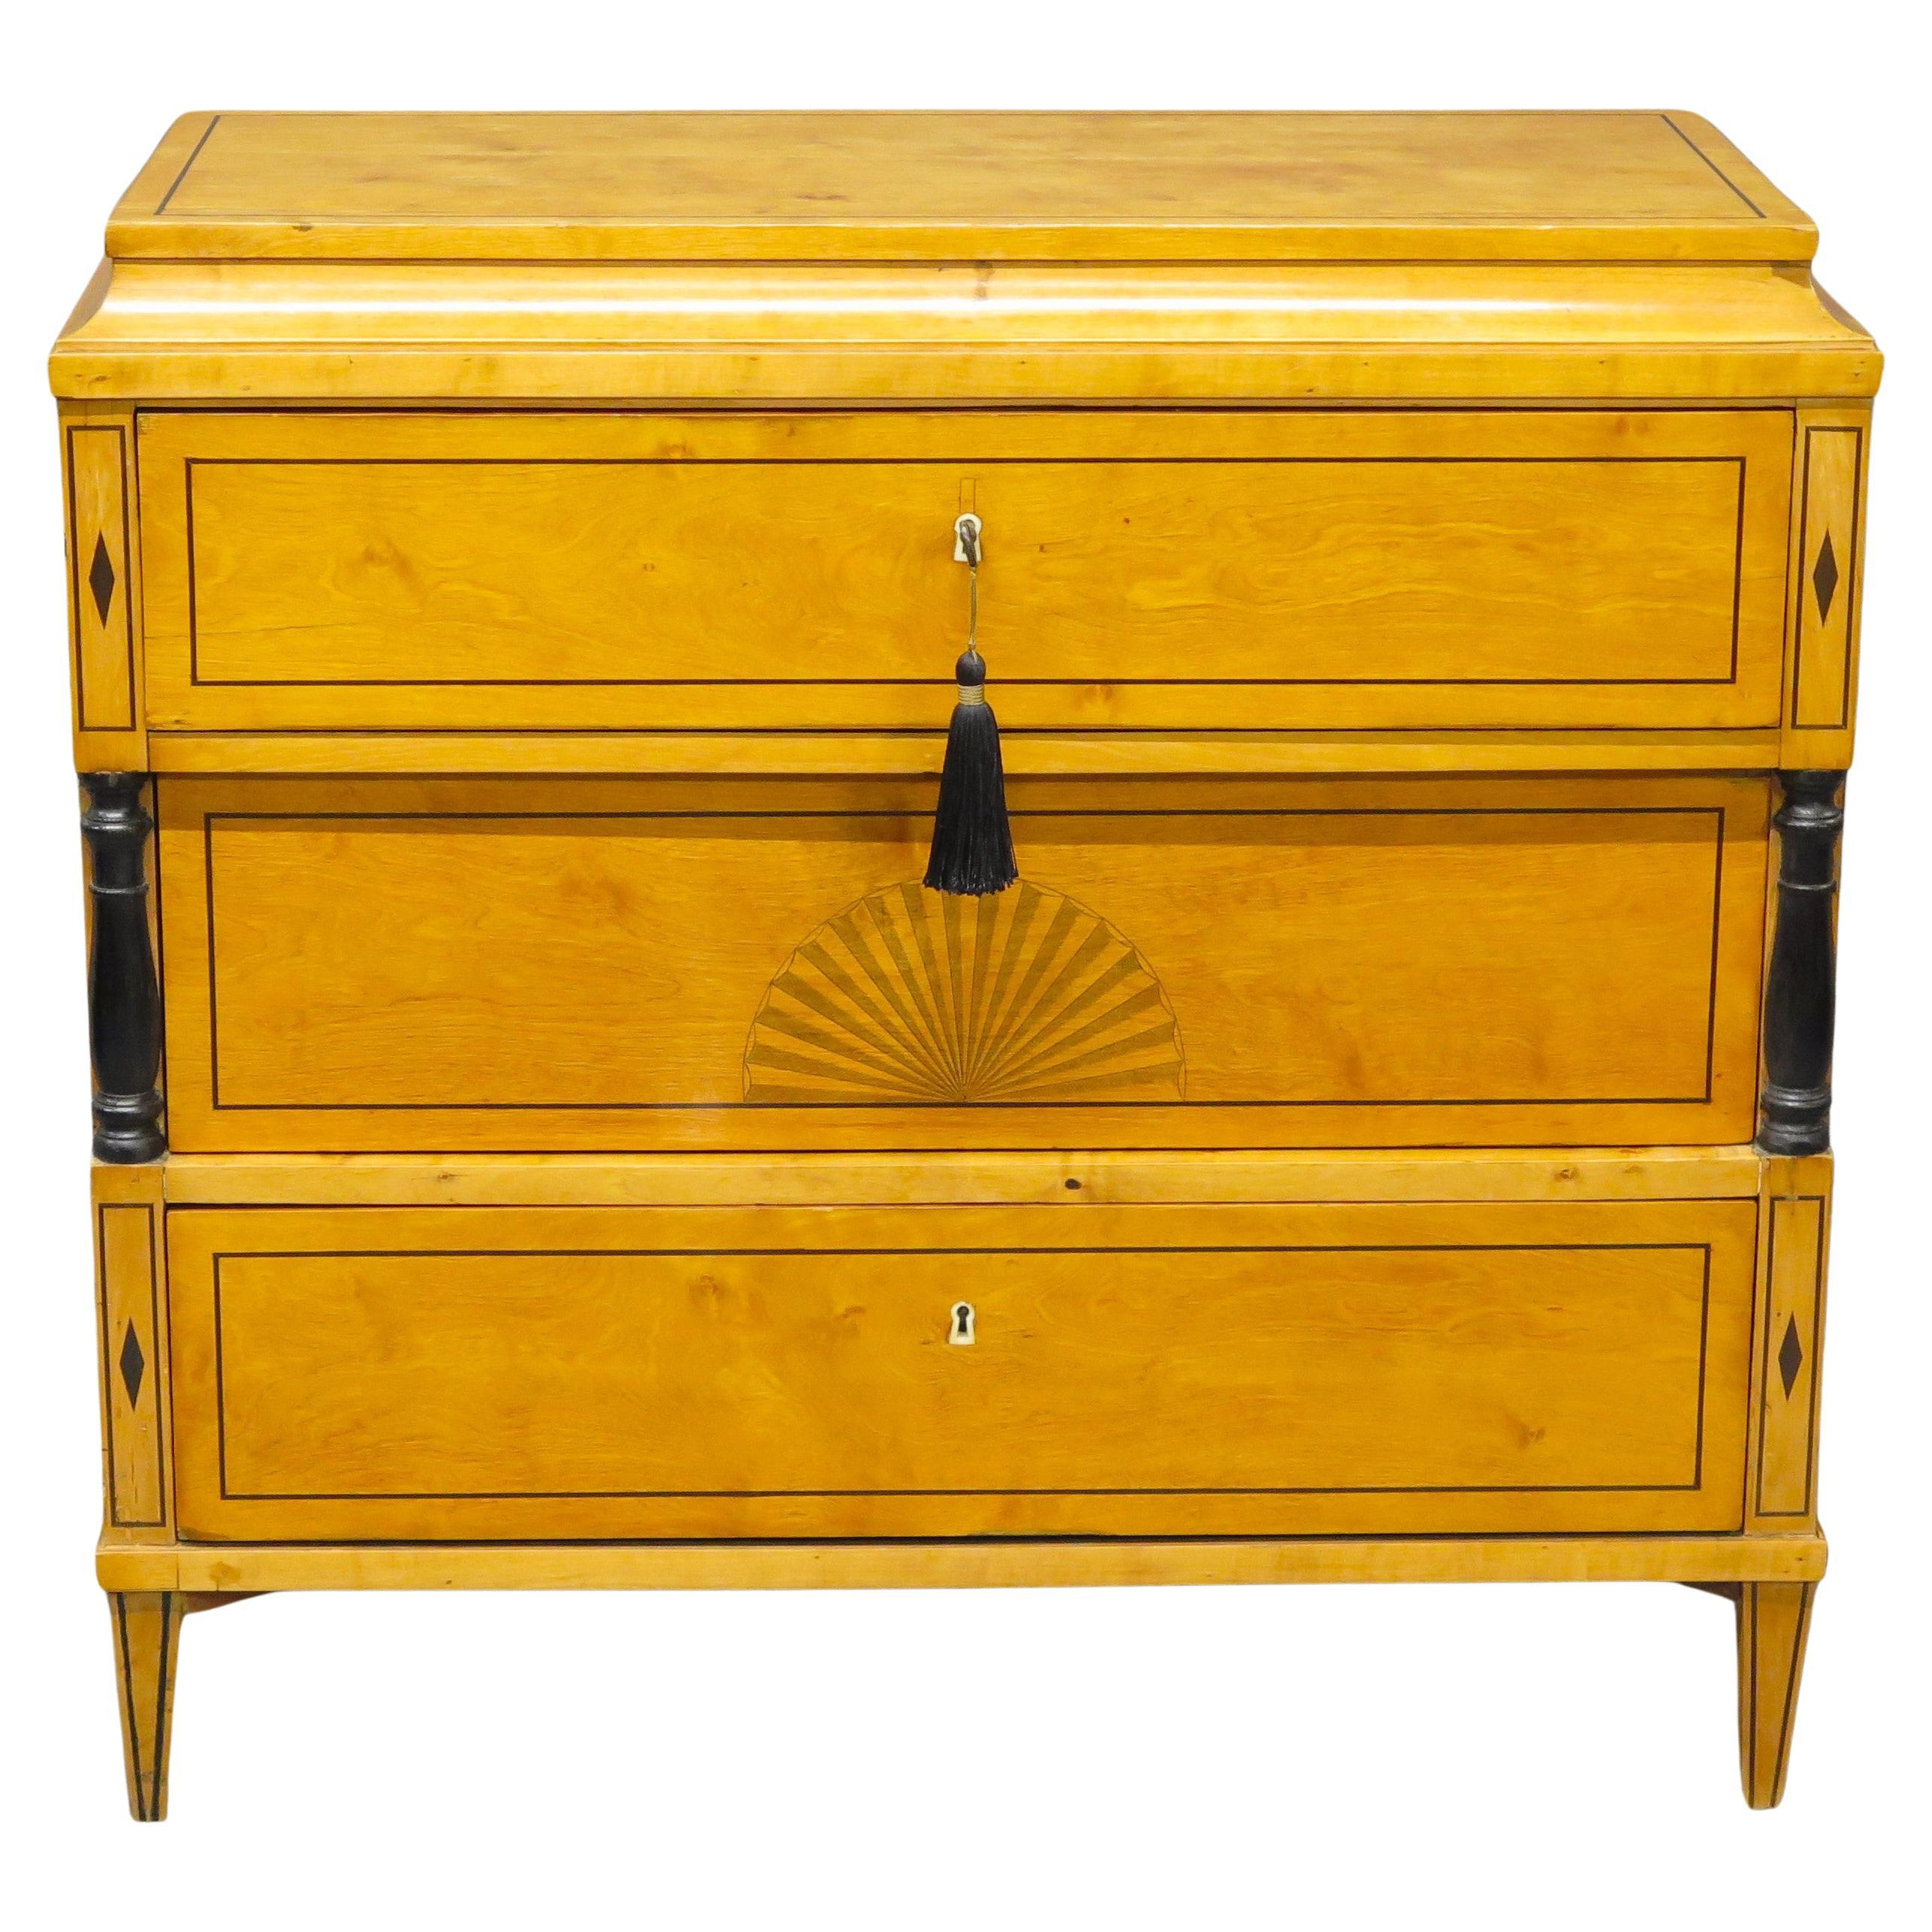 A Biedermeier Inlaid Commode First Half 19th C. For Sale